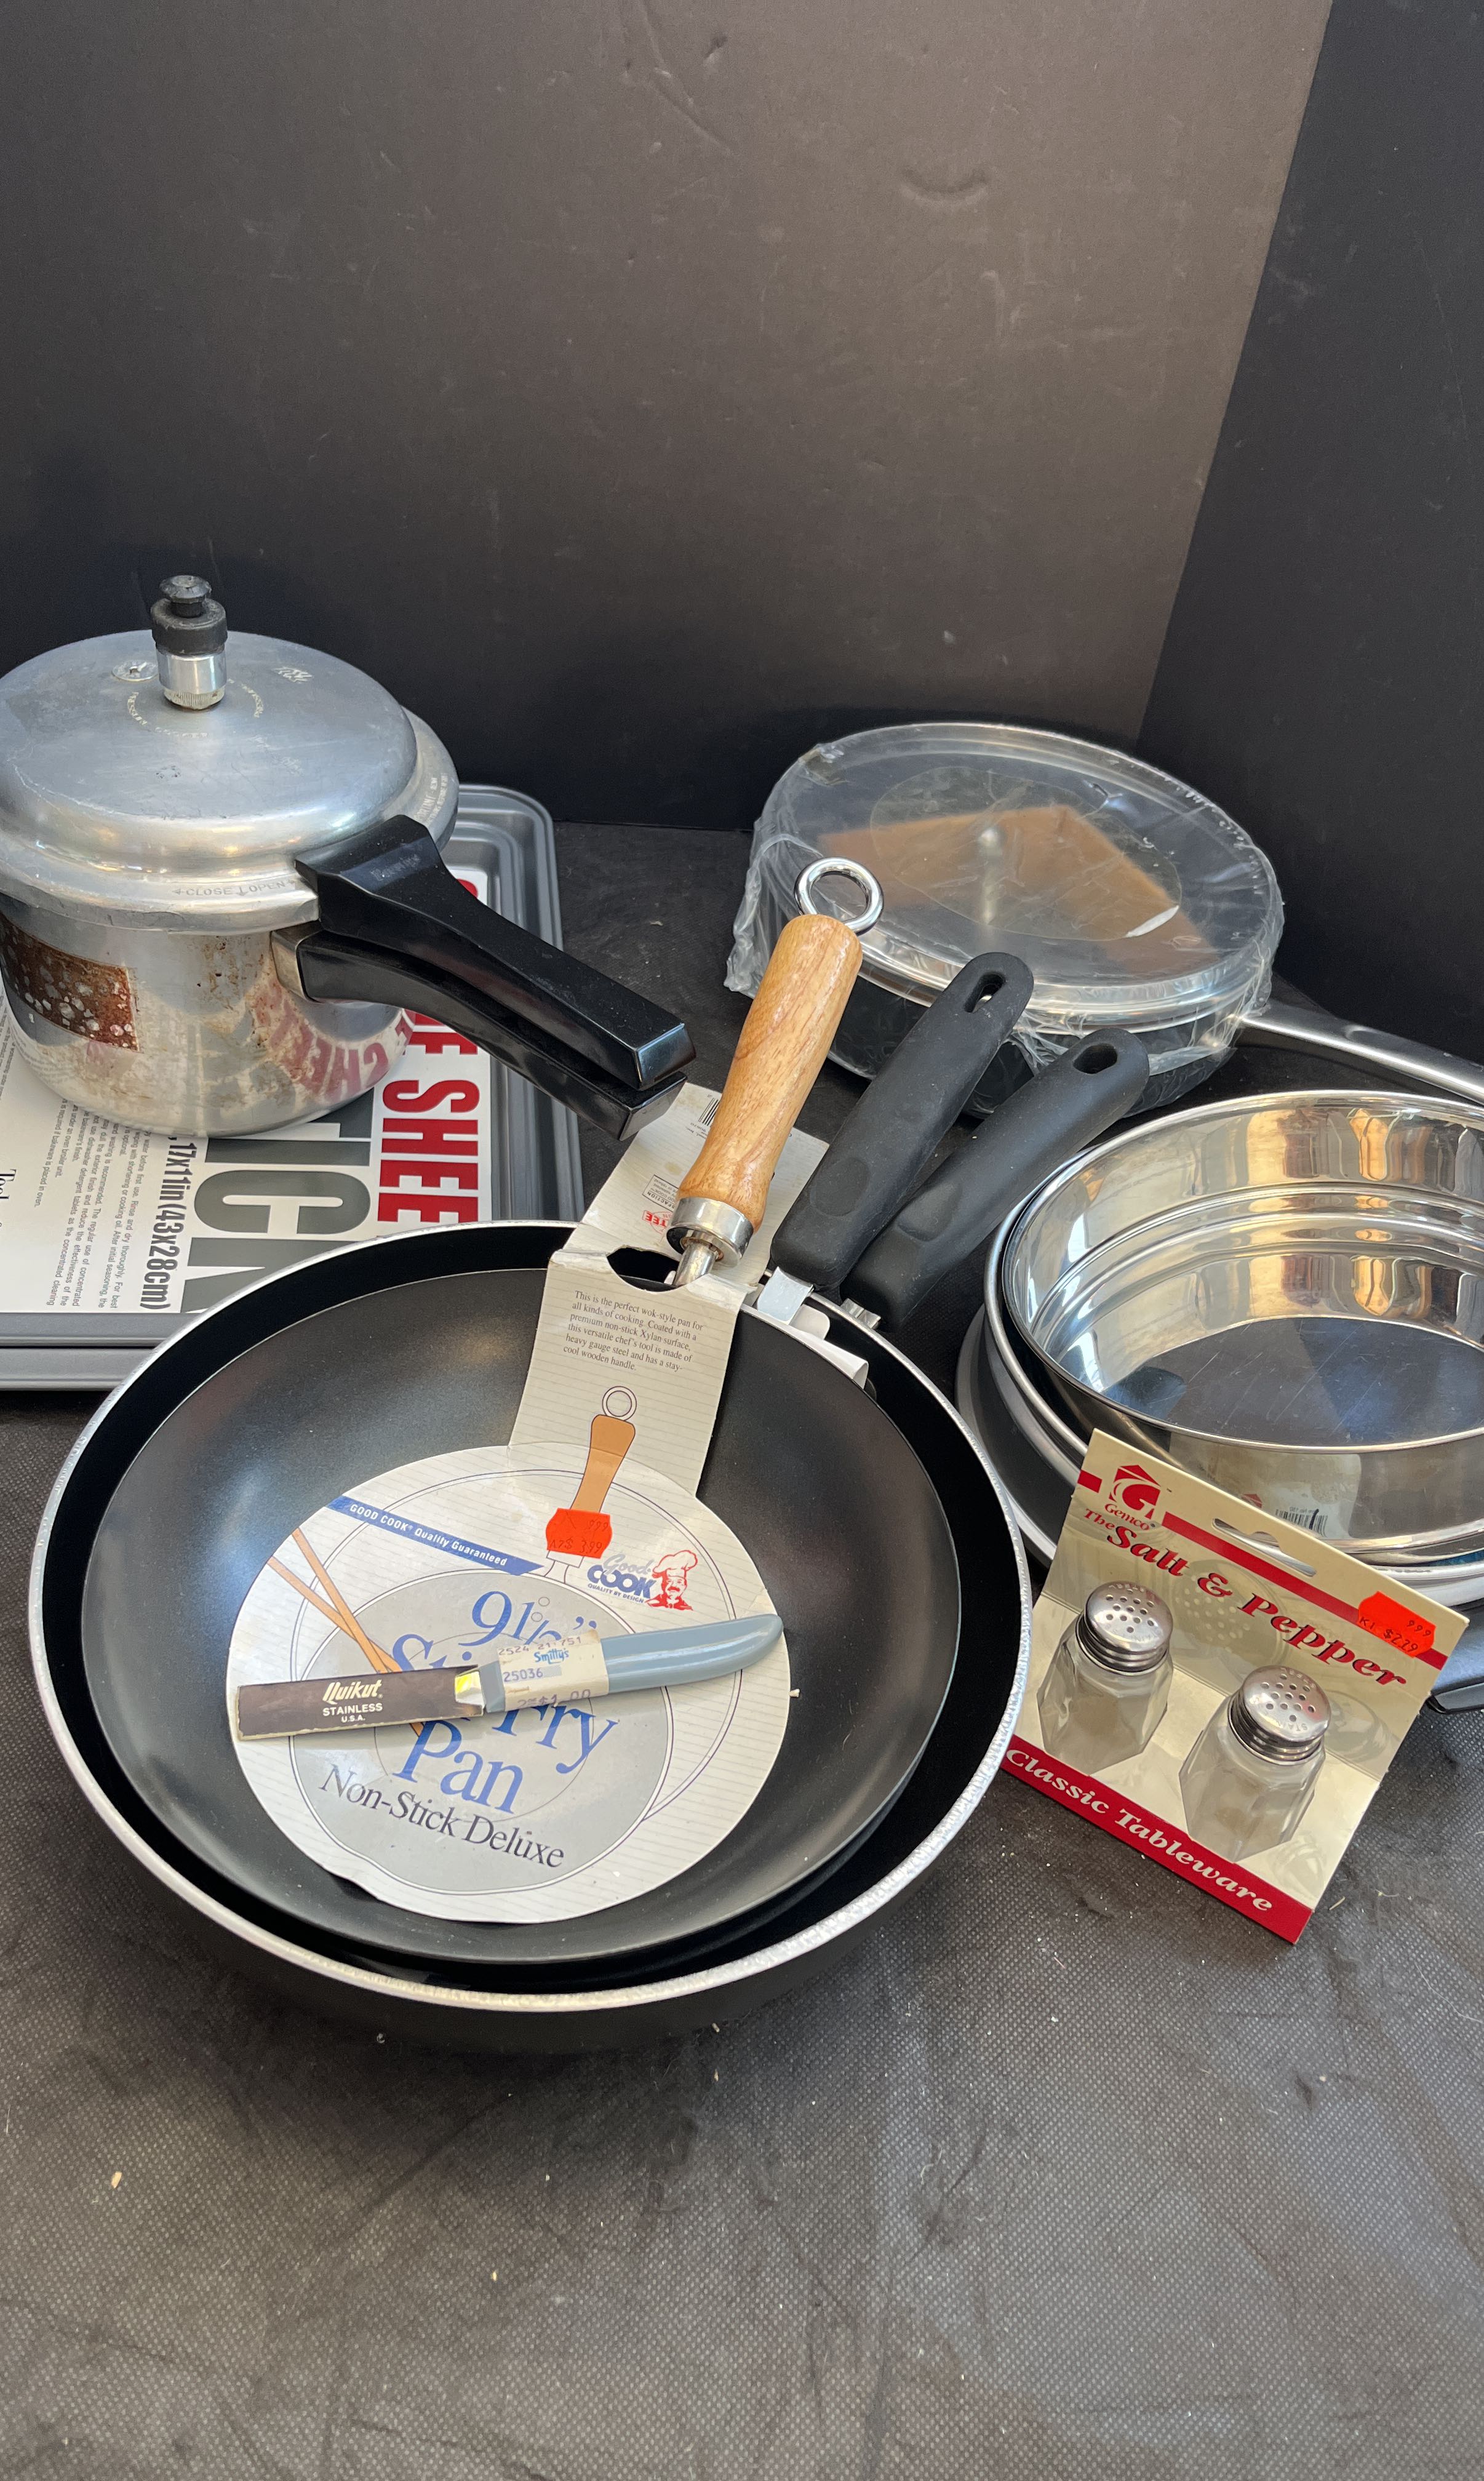 Sold at Auction: Pots and Pans, Technique and Cooks Essentials